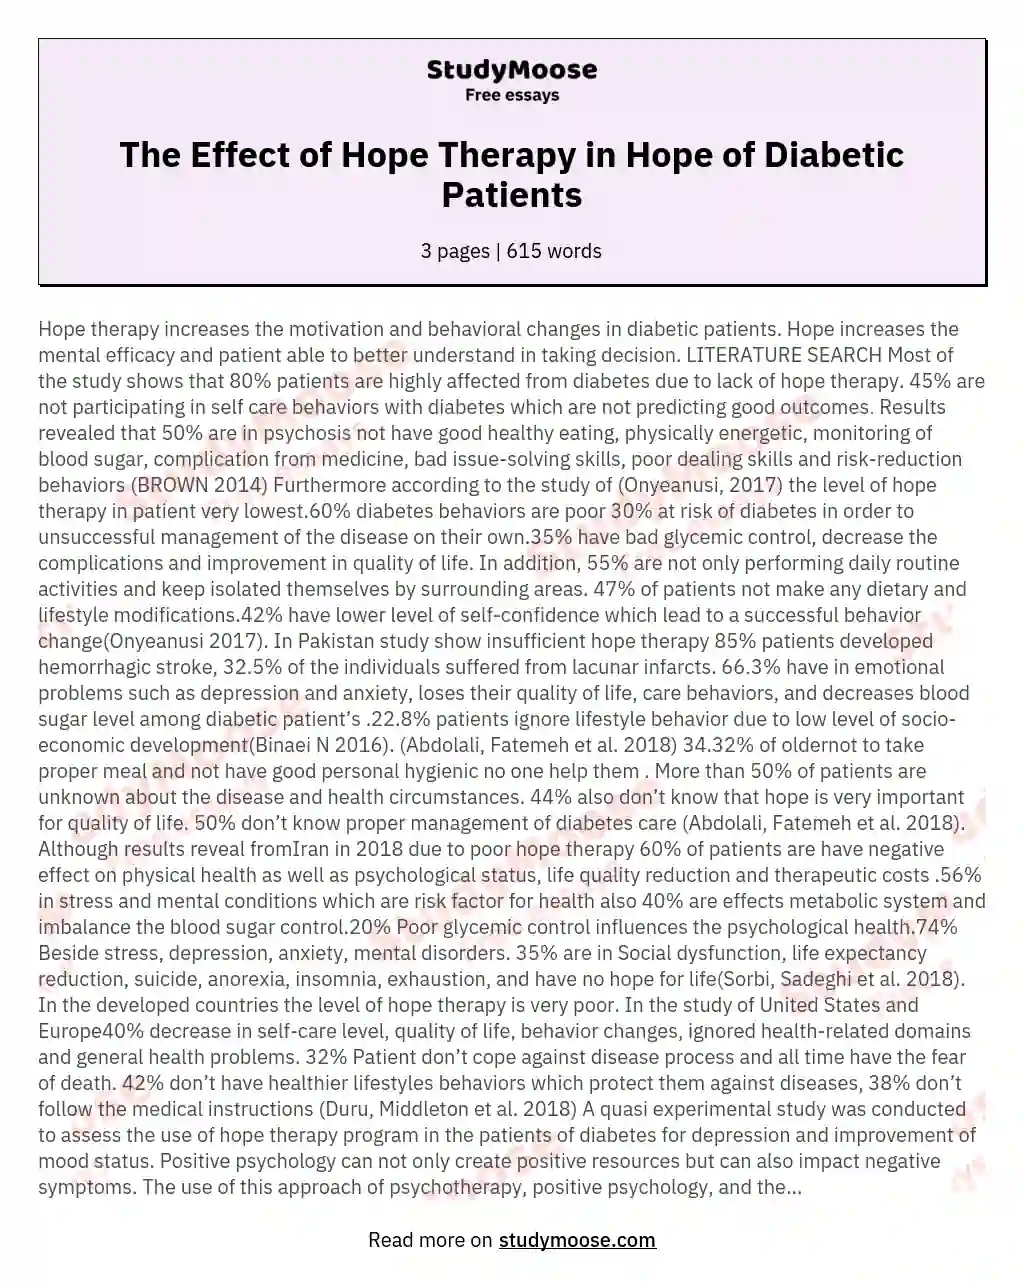 The Effect of Hope Therapy in Hope of Diabetic Patients